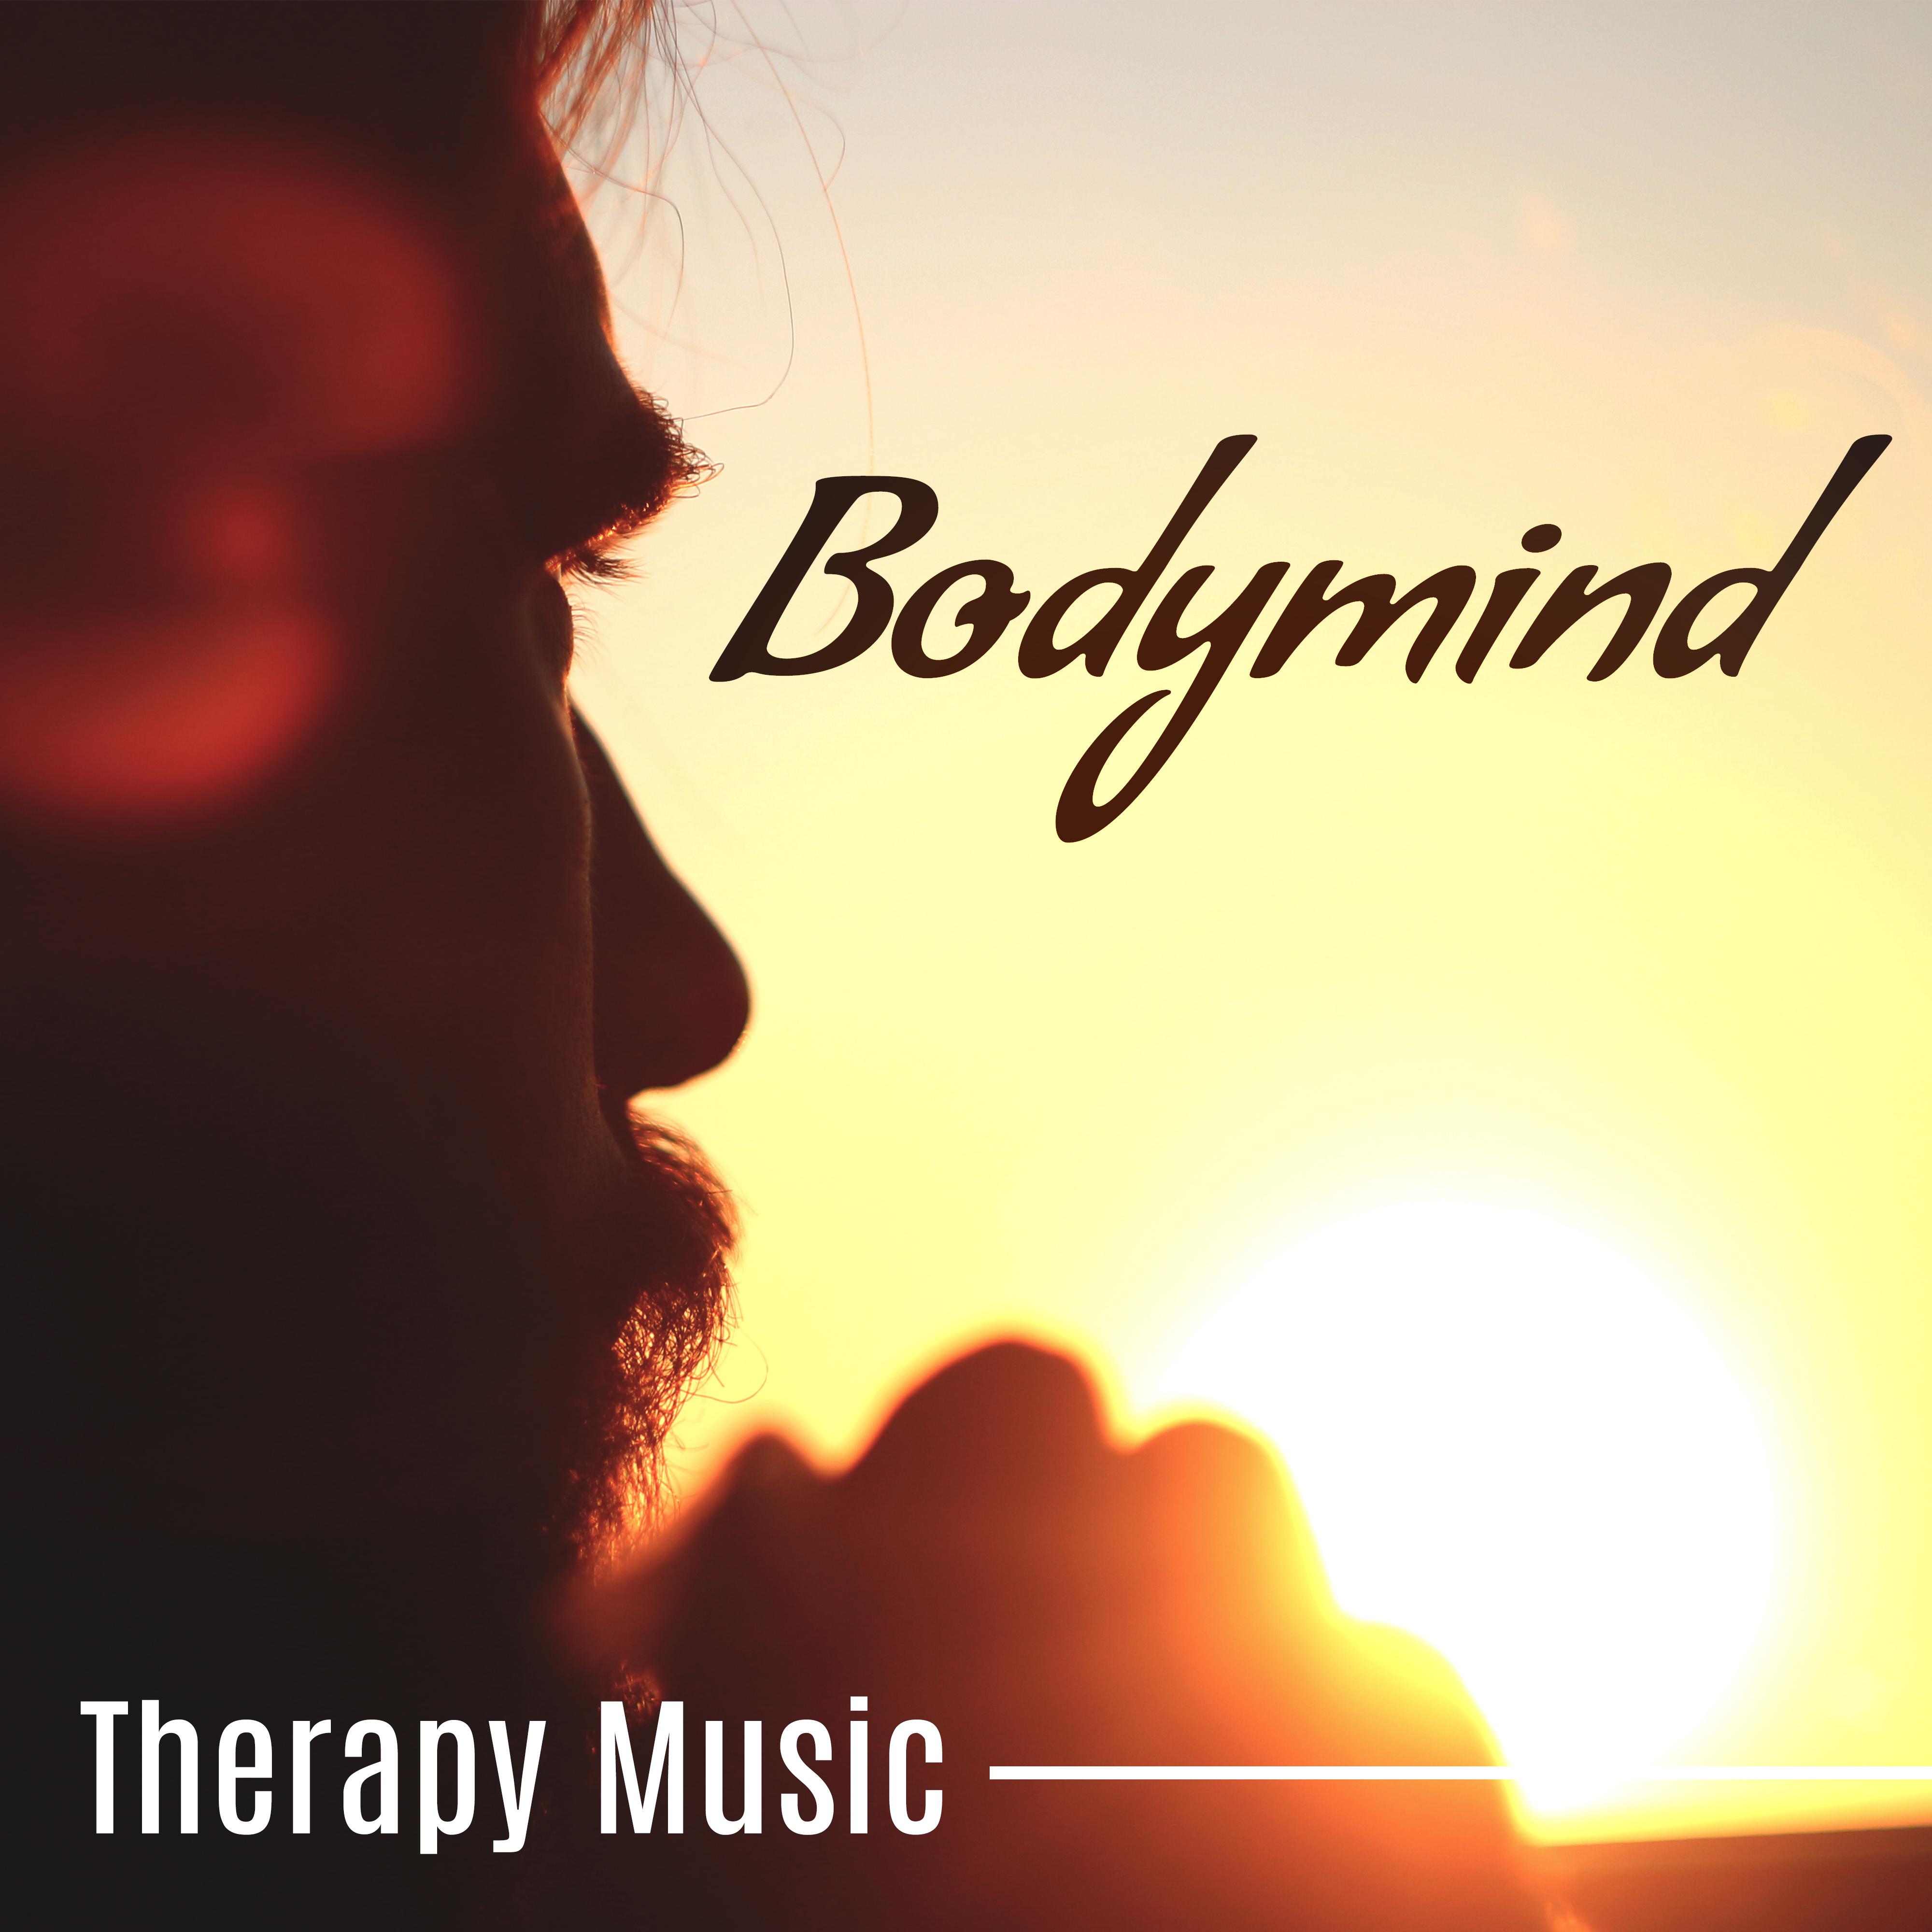 Bodymind Therapy Music  Calming Nature Sounds, Relaxing Music for Better Sleep, Full Rest, Deep Relaxation